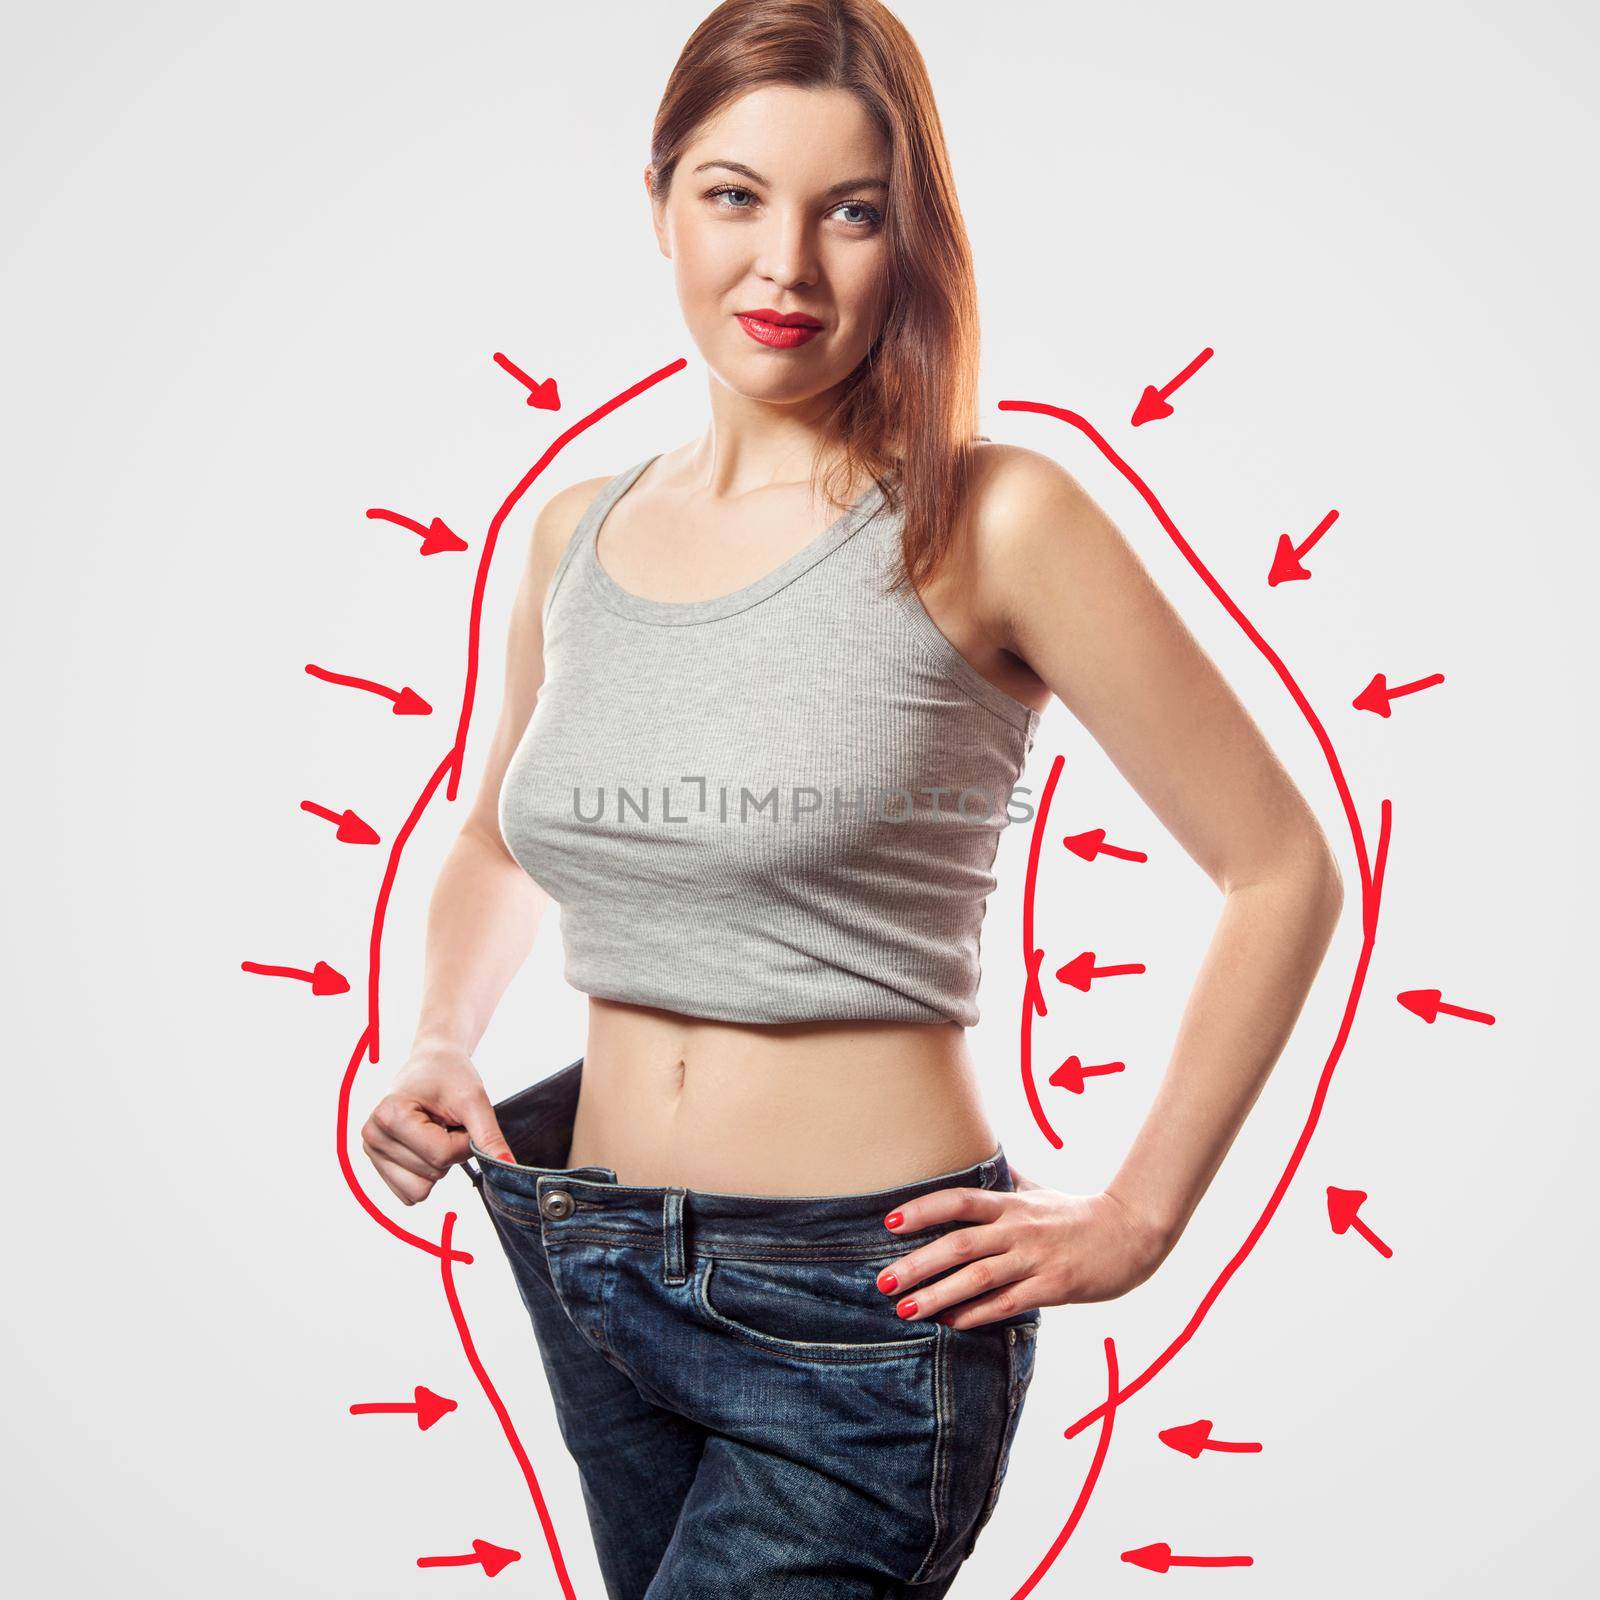 portrait of happy beautiful slim young woman in big jeans and gray top showing successful weight loss, indoor, studio shot, isolated on light gray background, diet concept.